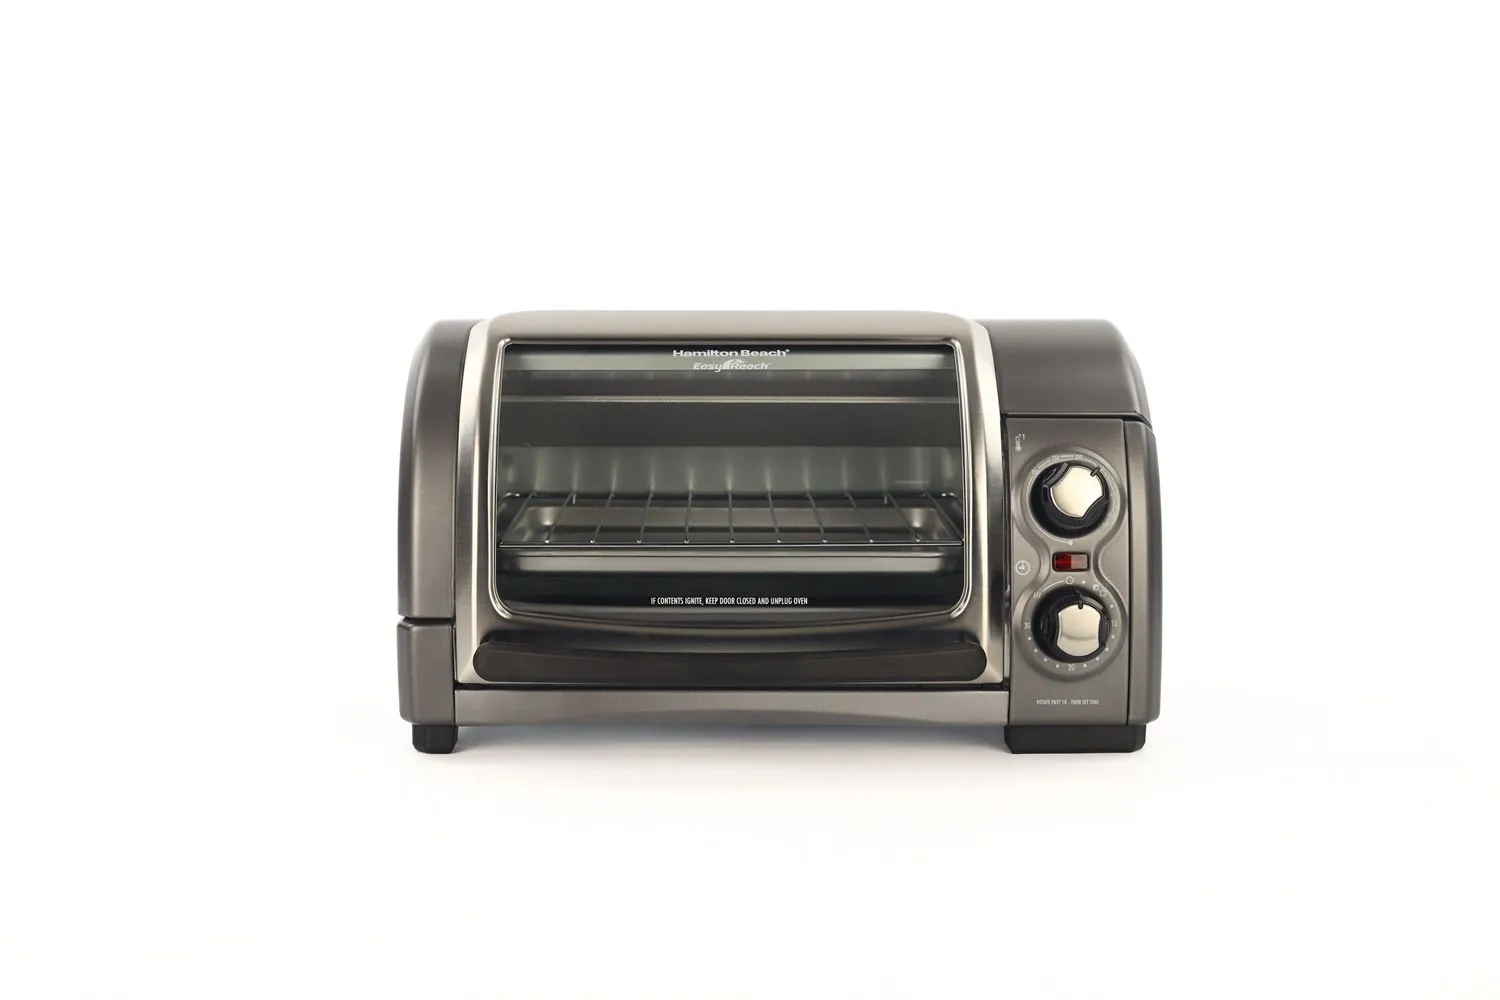 https://cdn.healthykitchen101.com/reviews/images/toaster-ovens/cl9xw1f64004tq588656laate.jpg